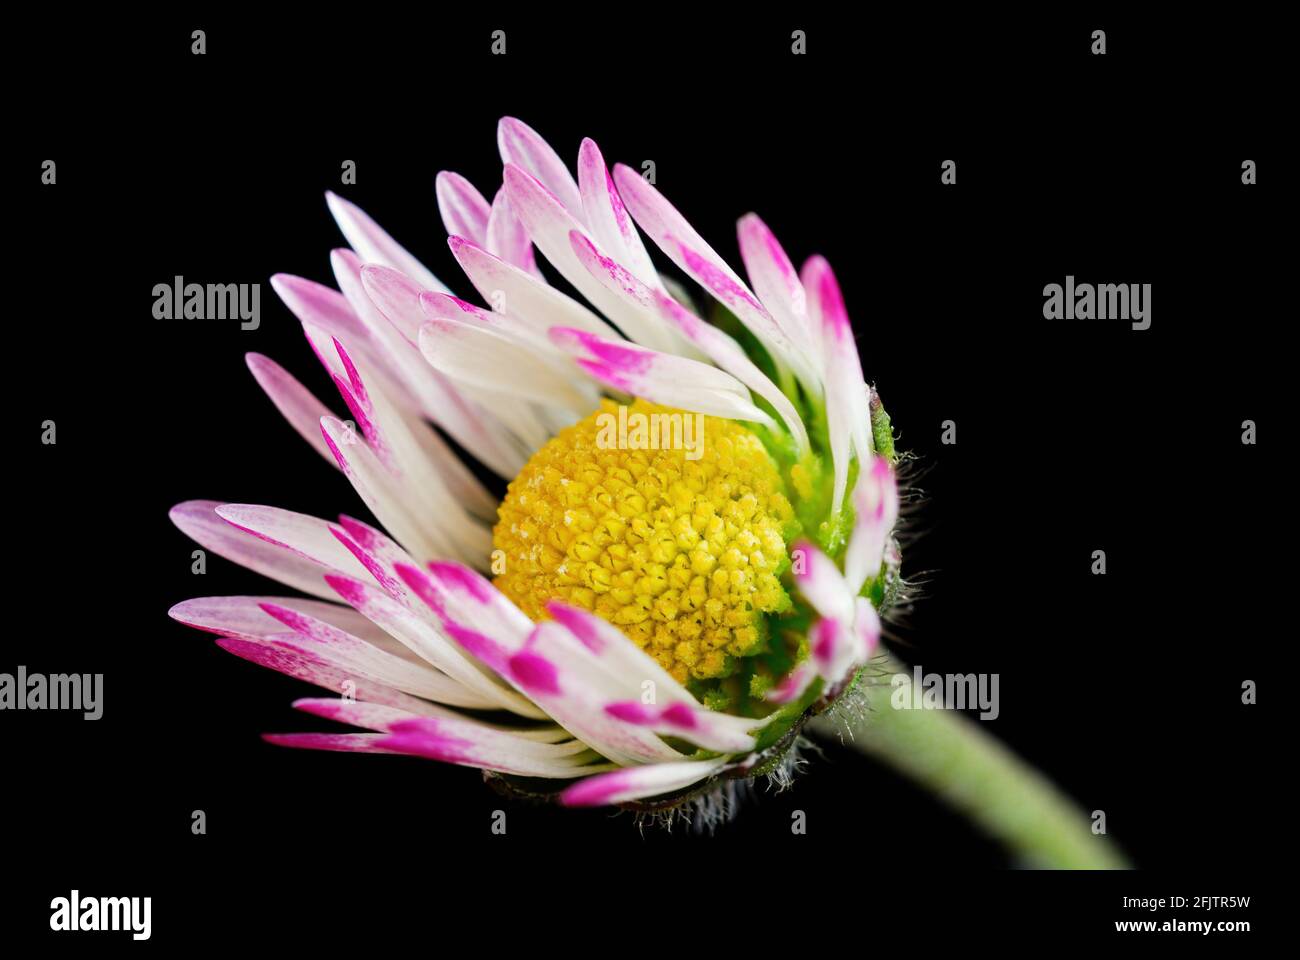 Tiny common daisy meadow flower with petals in purple white. Isolated on black background. Close up shot with macro lens. Genus Bellis perennis. Stock Photo